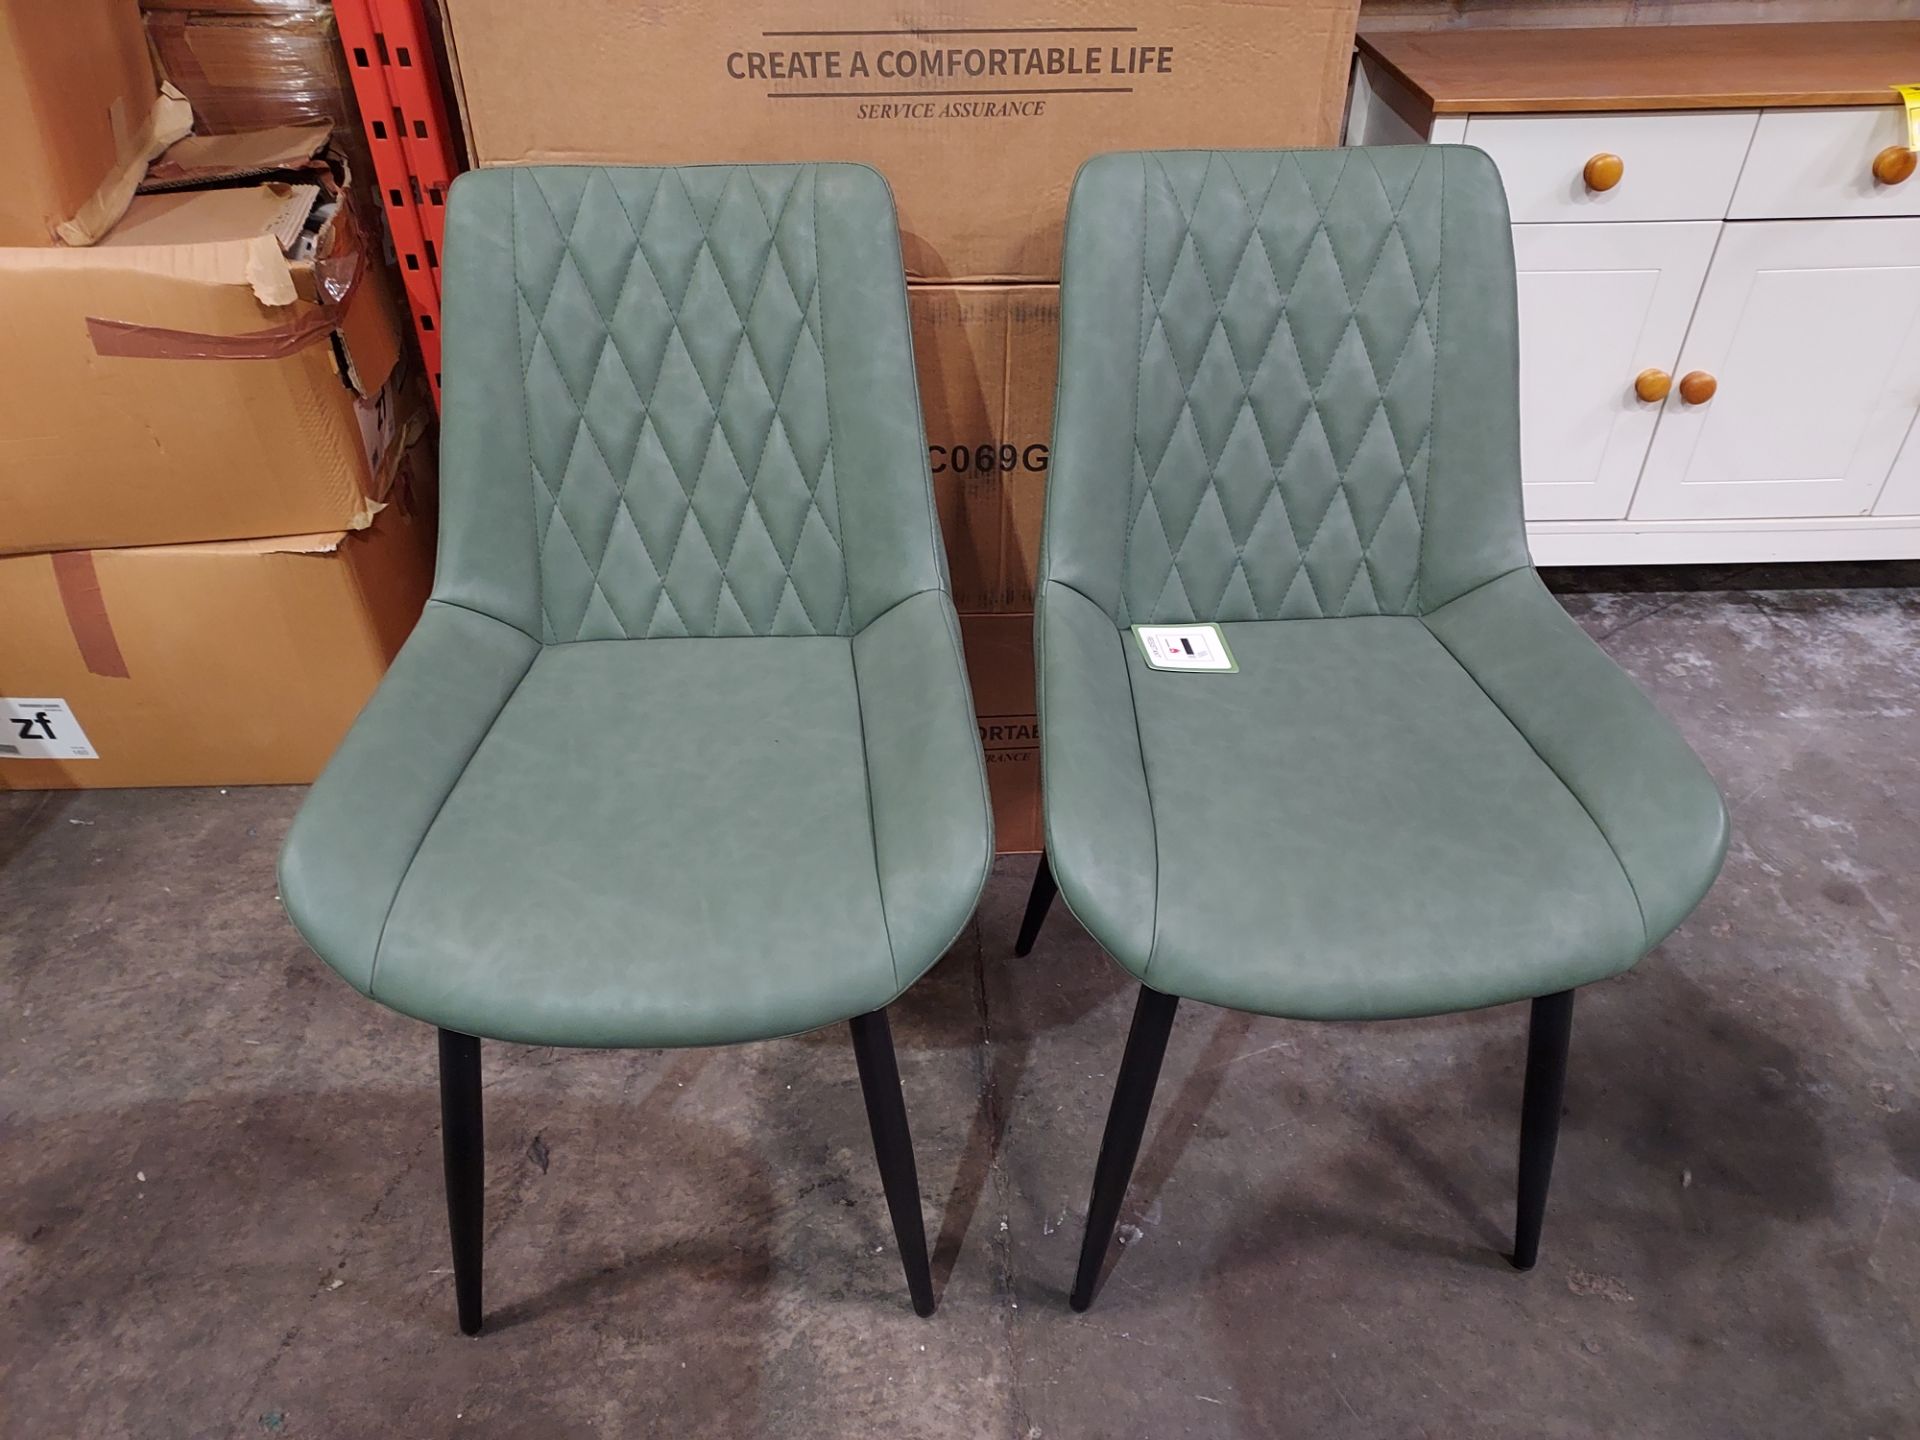 6 X BRAND NEW ENJOY THE GOOD LIFE DINING CHAIR IN LEATHER LOOK GREEN, WITH BLACK METAL LEGS IN THREE